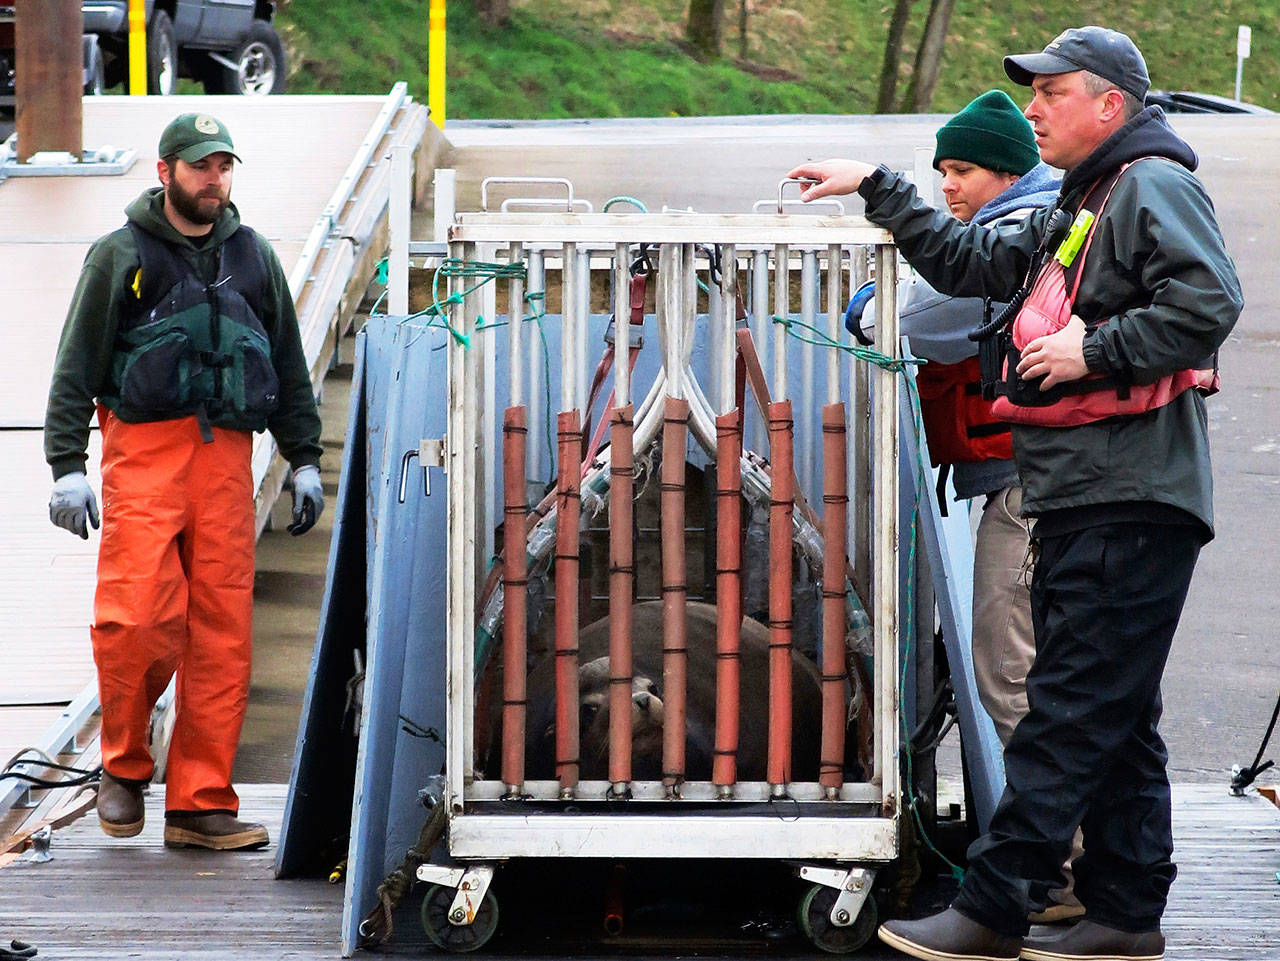 In this March 14 file photo, workers with the Oregon Department of Fish and Wildlife, the Washington Department of Fish and Wildlife and the Pacific States Marine Fisheries Commission work together to load a trapped California sea lion onto a truck after it was captured in the Willamette River near Oregon City, Ore. (Gillian Flaccus/The Associated Press)